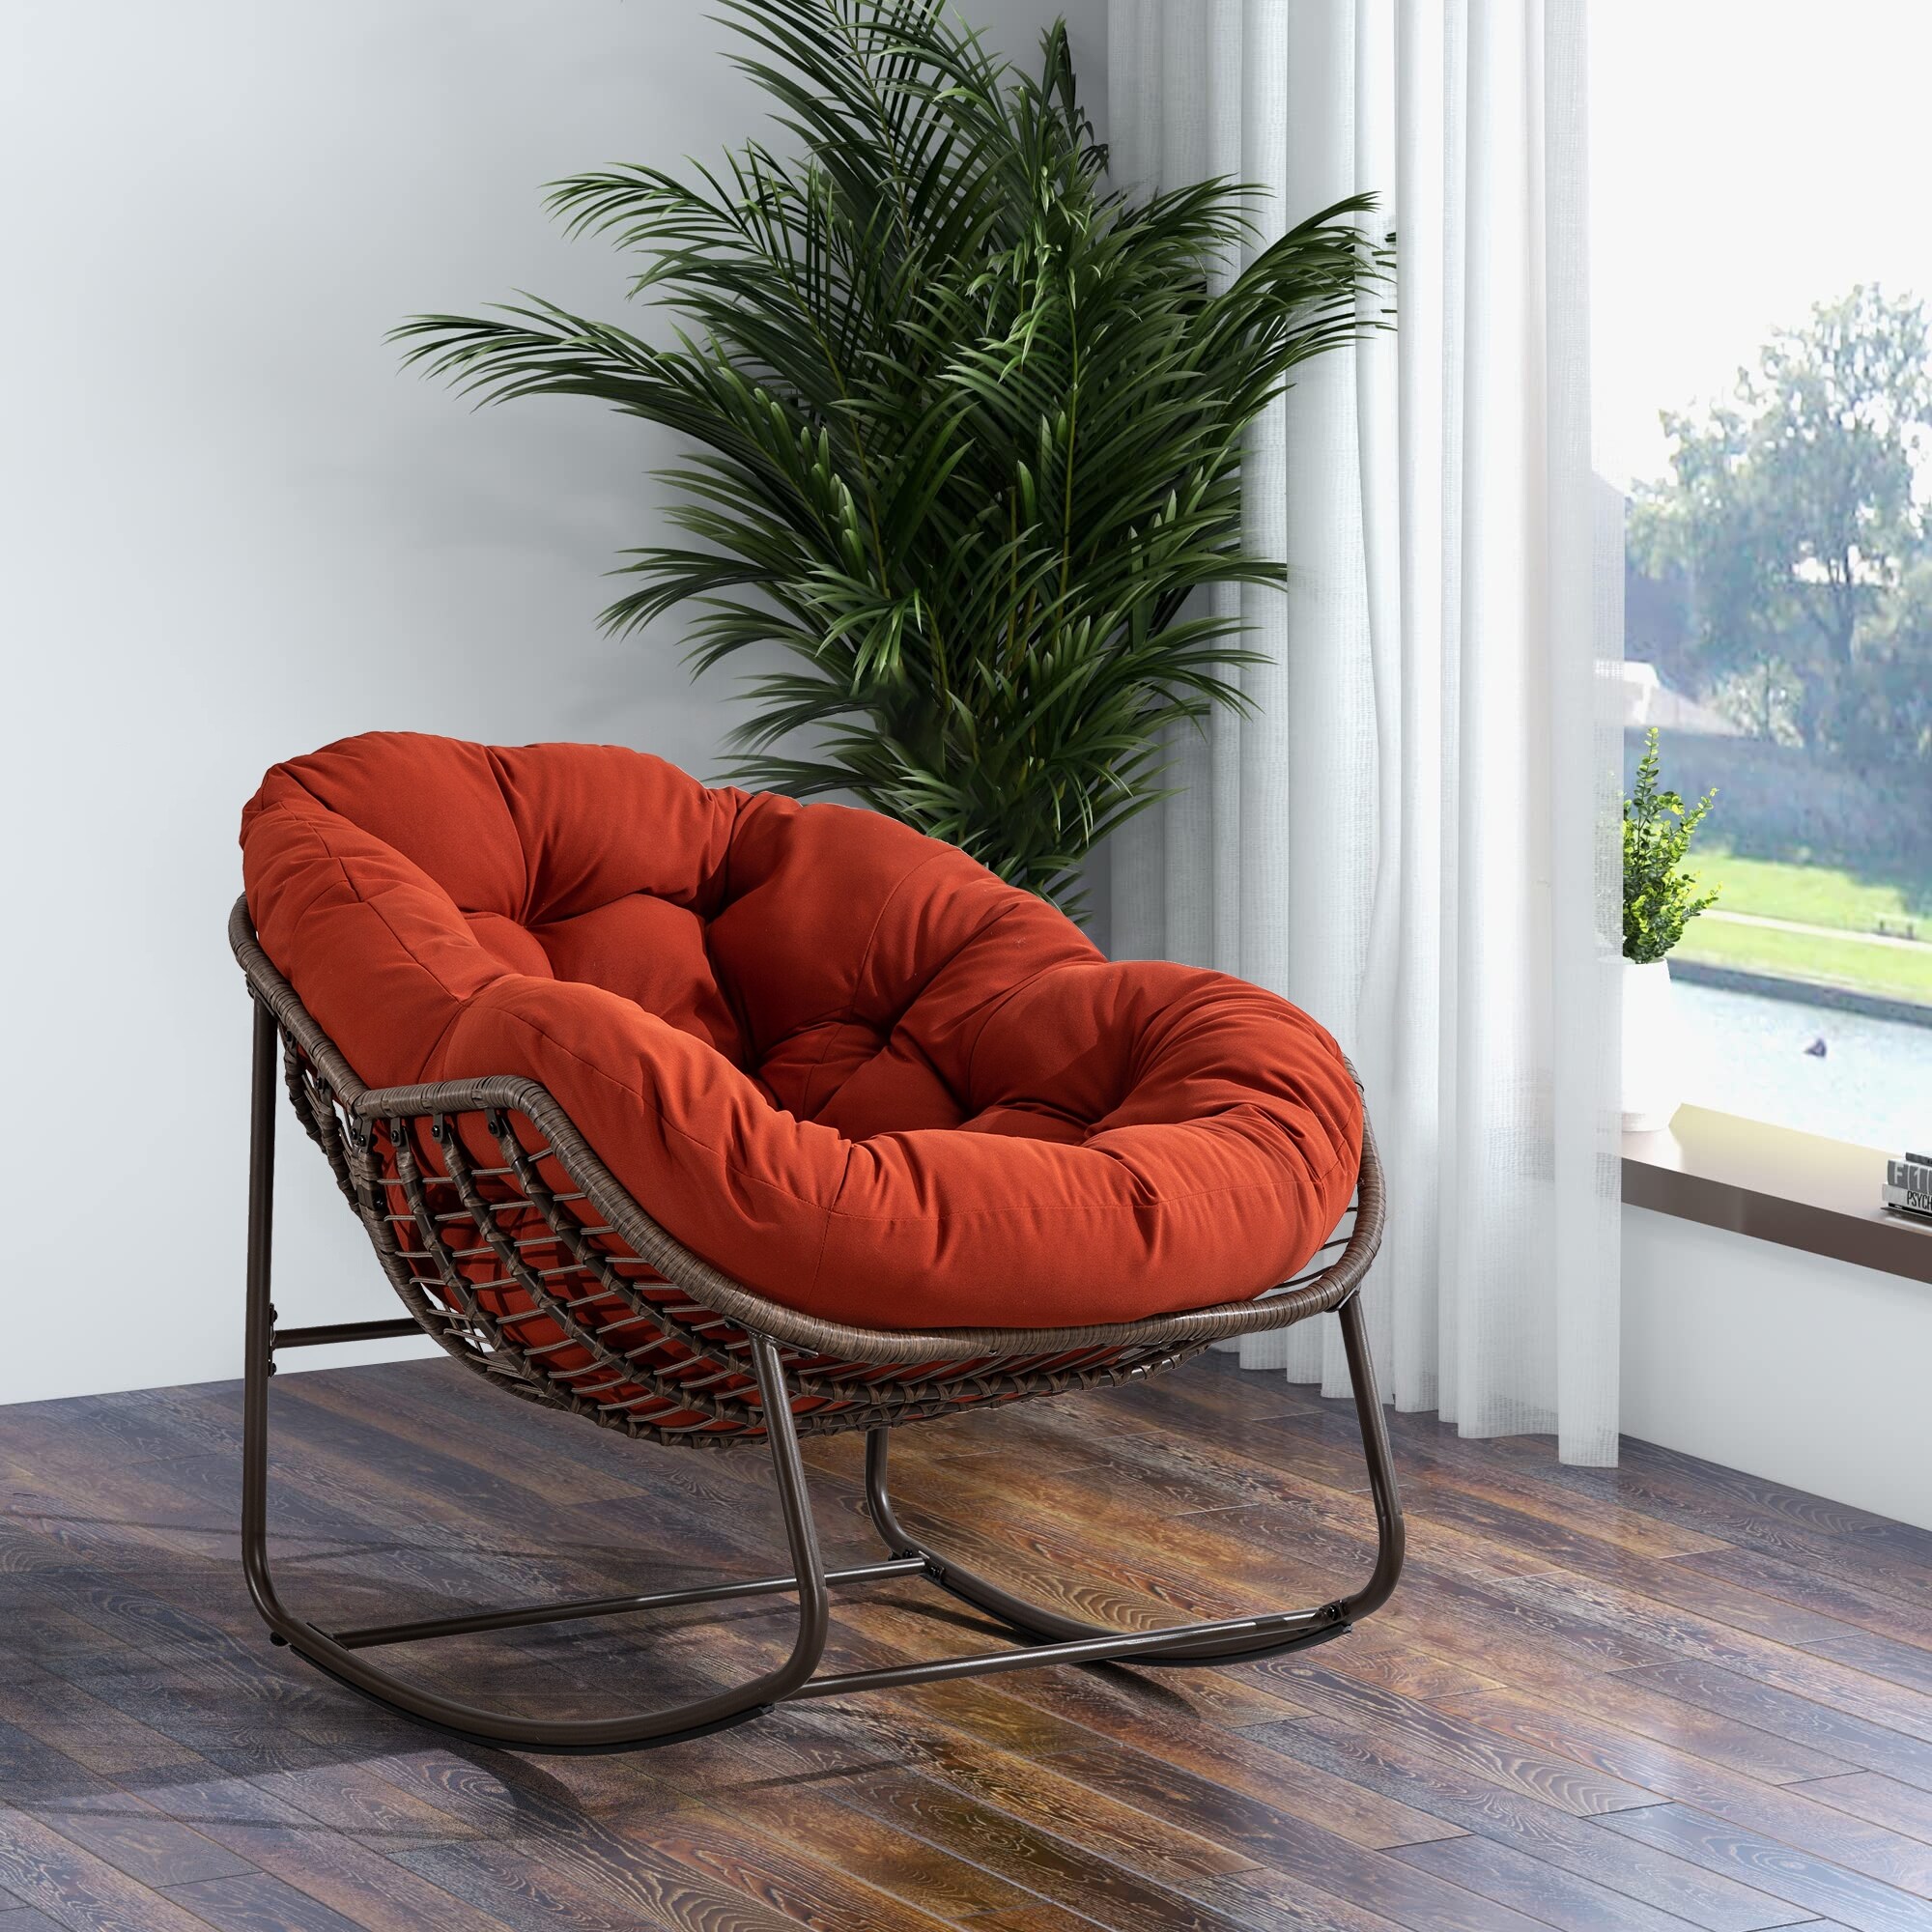 https://ak1.ostkcdn.com/images/products/is/images/direct/e0a8ea04aad2b62bbdfca240418ff6d88d621a33/Outdoor-Rattan-Rocking-Chair%2CPadded-Cushion-Rocker-Recliner-Chair-Outdoor-for-Front-Porch%2C-Living-Room%2C-Patio%2C-Garden.jpg